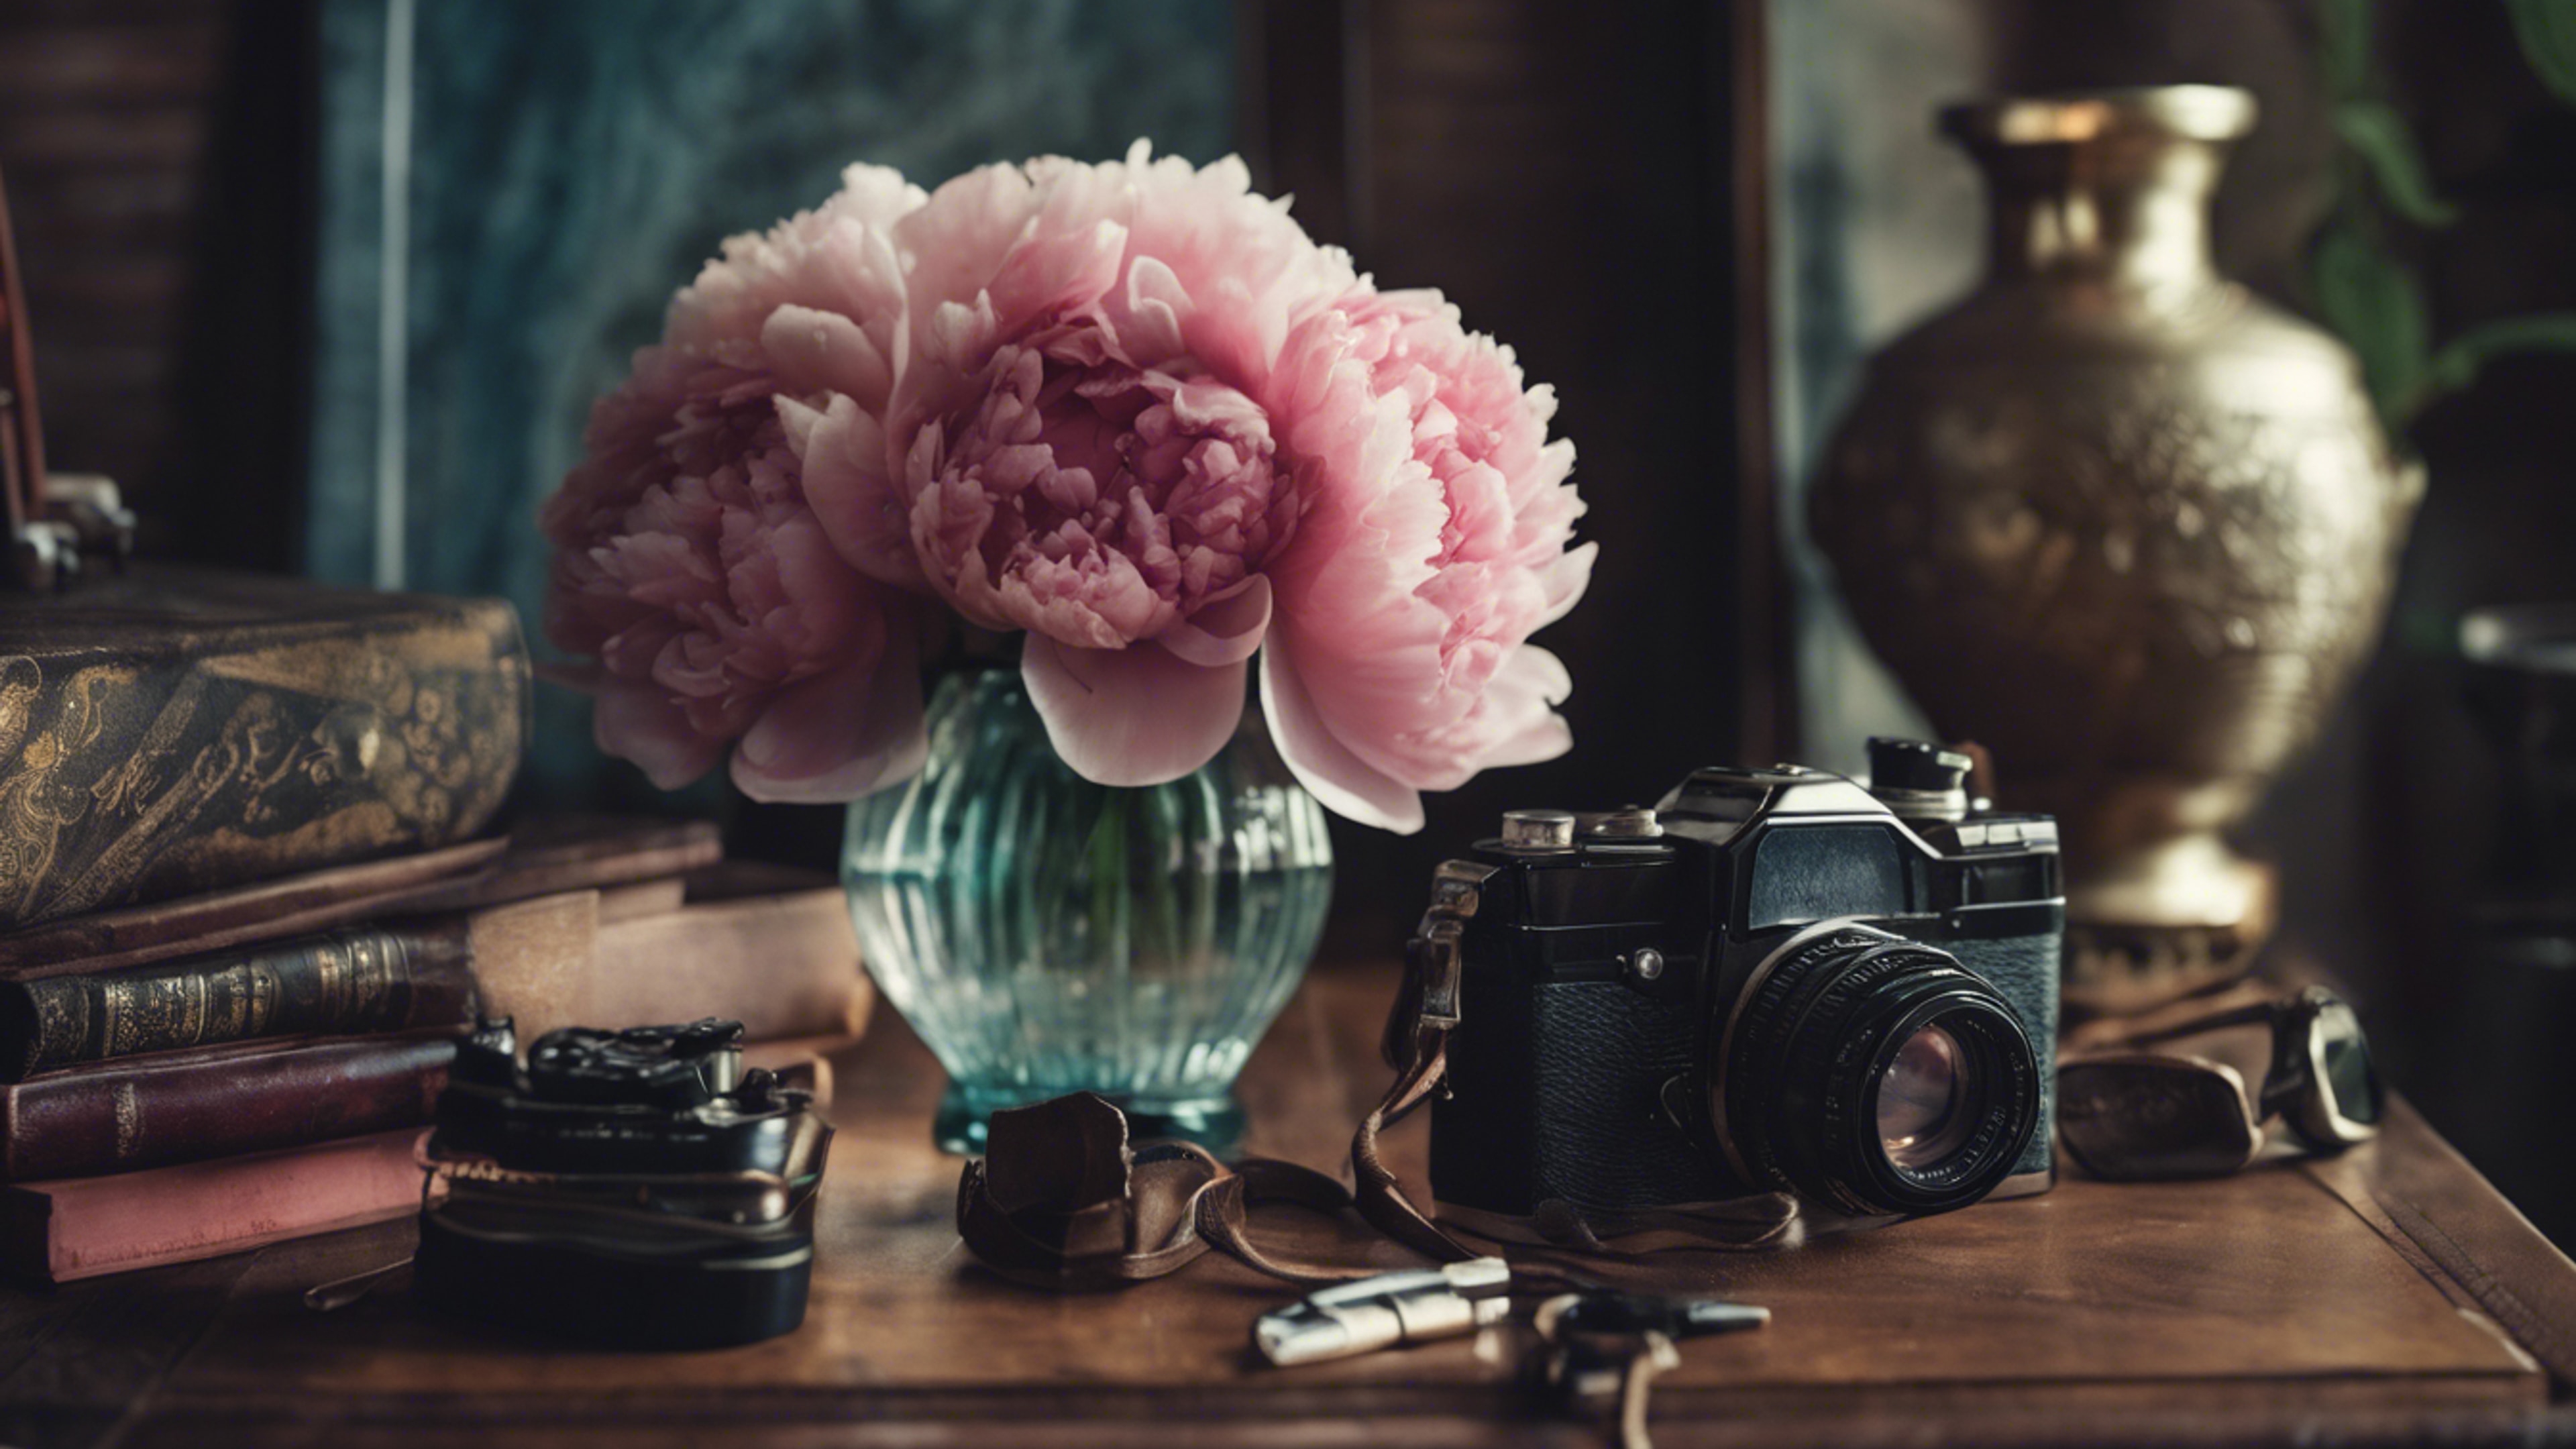 A vintage still life setting featuring dark peonies and retro objects.壁紙[7ef54f4f14d0449db13a]